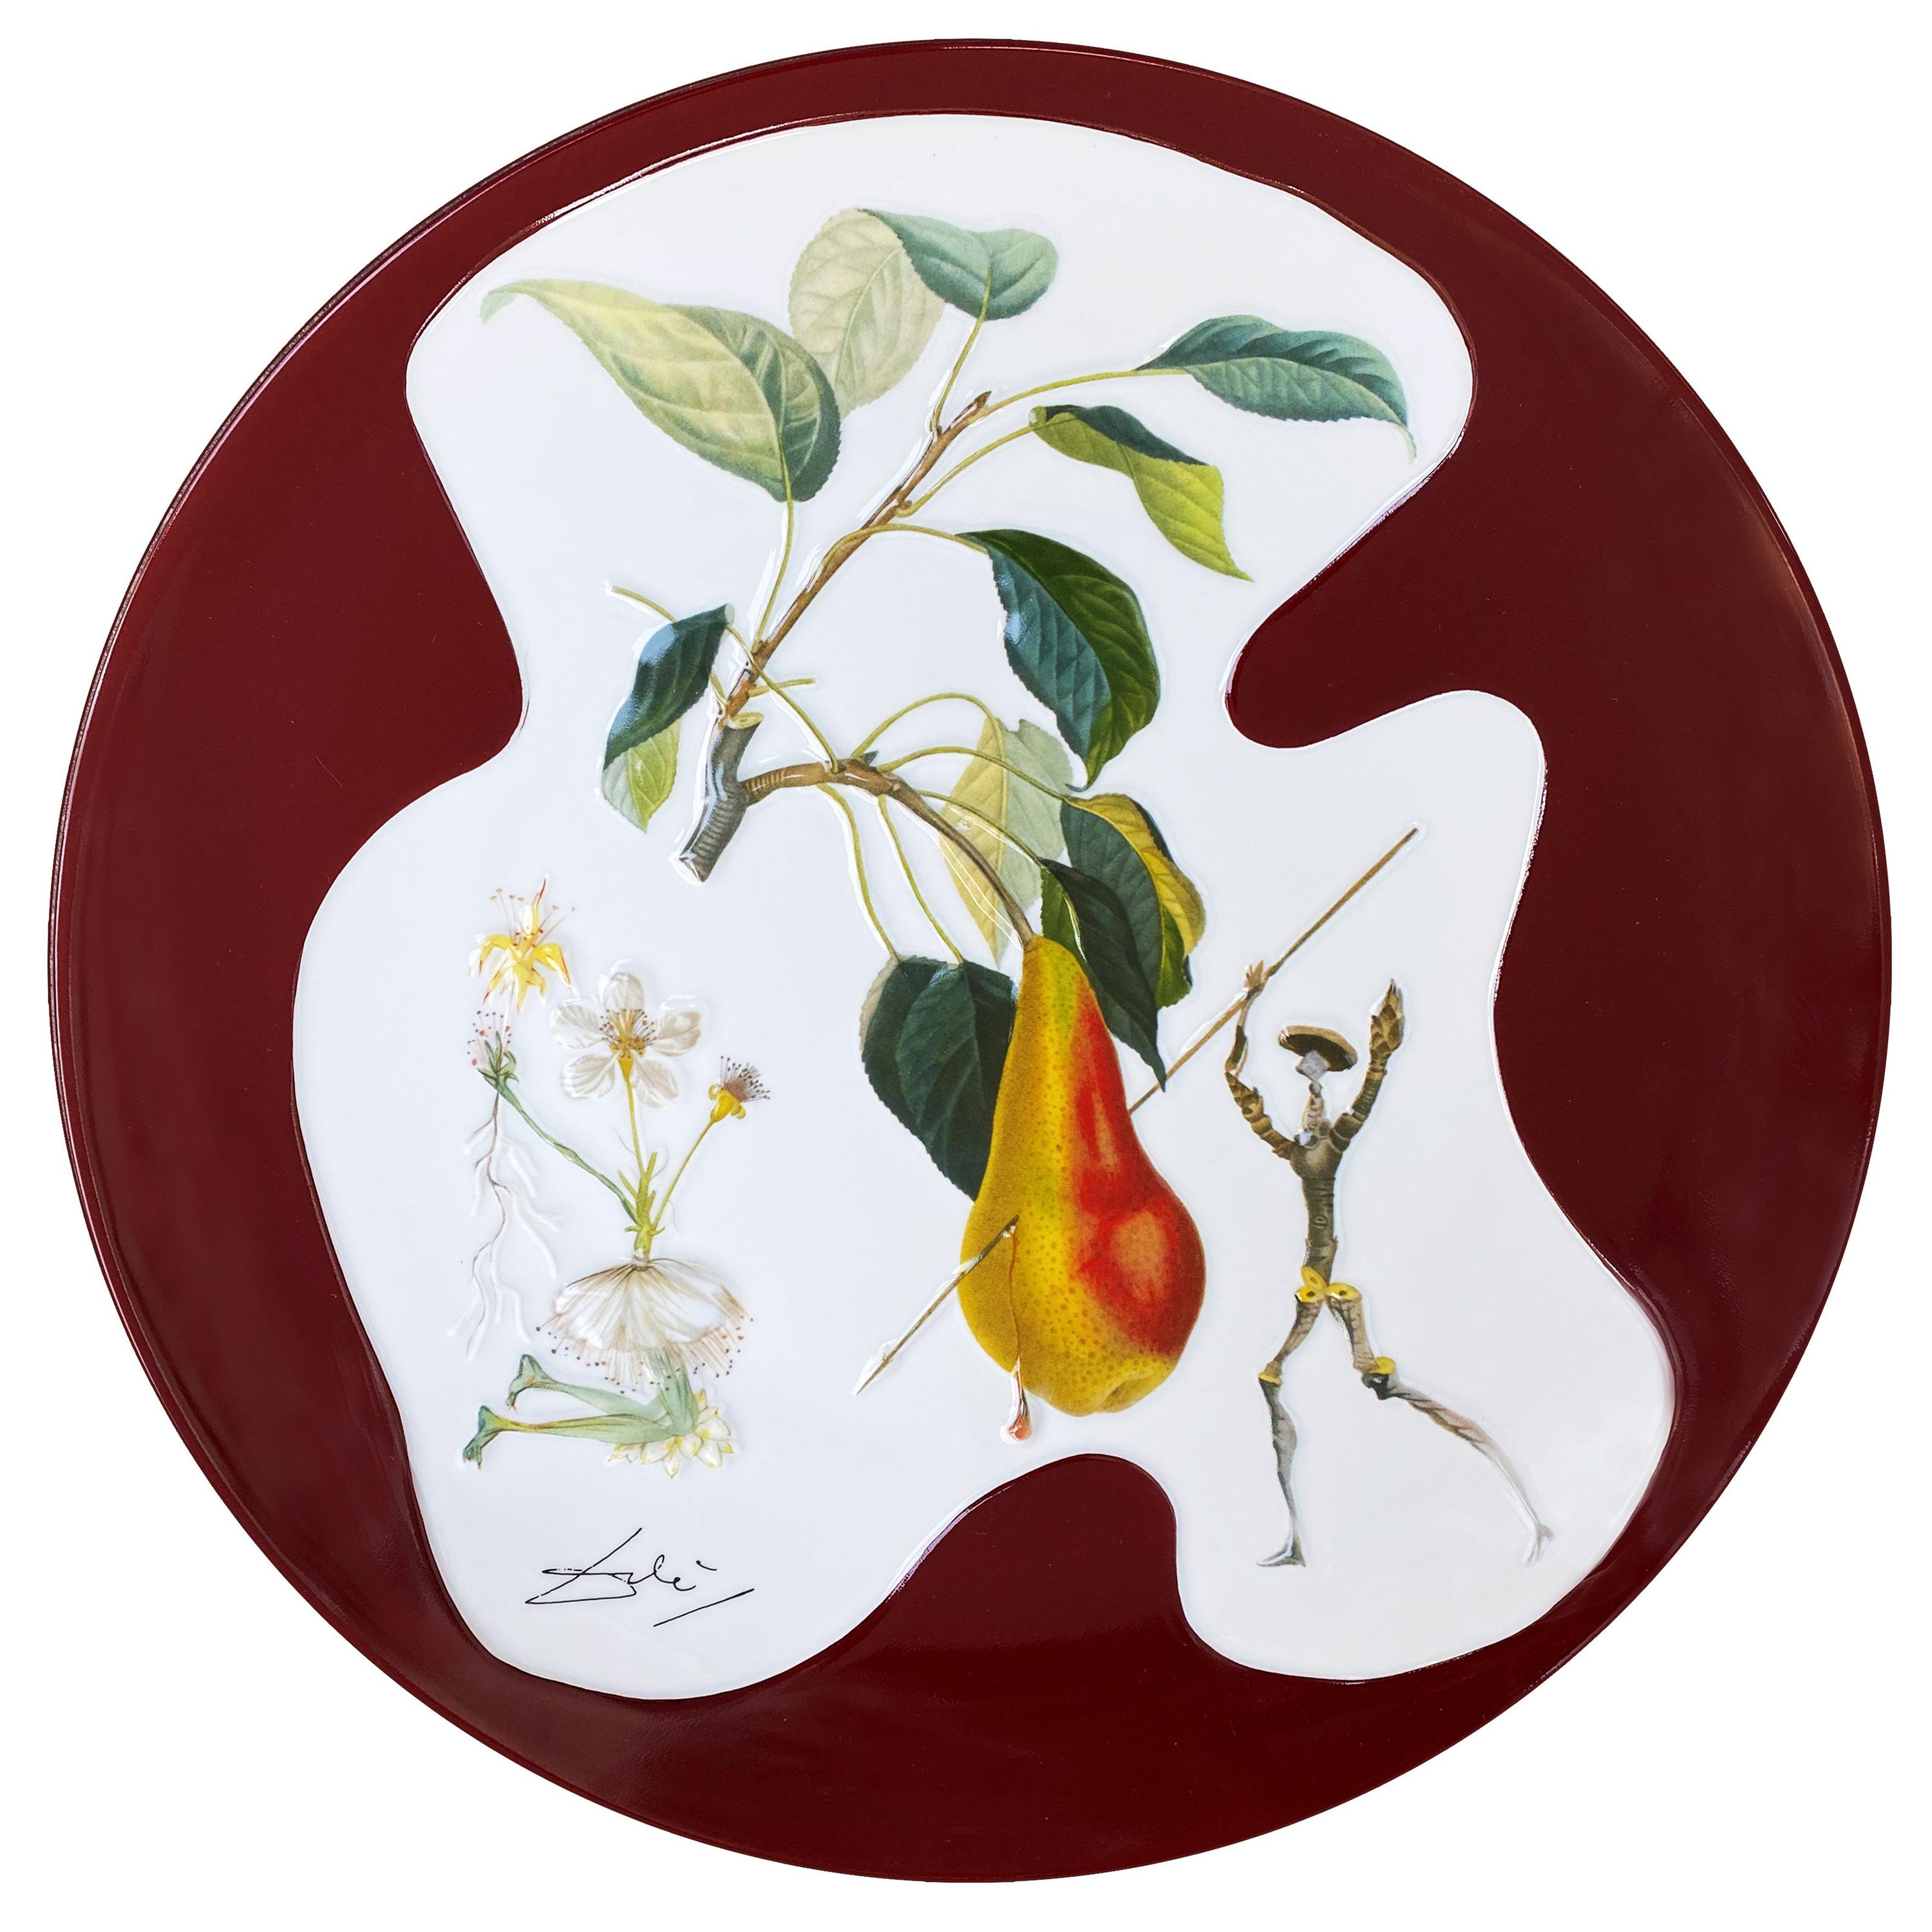 Dali Designed this Large Dish  "Don Quichotte" Limoges Limited Edition N°319 For Sale